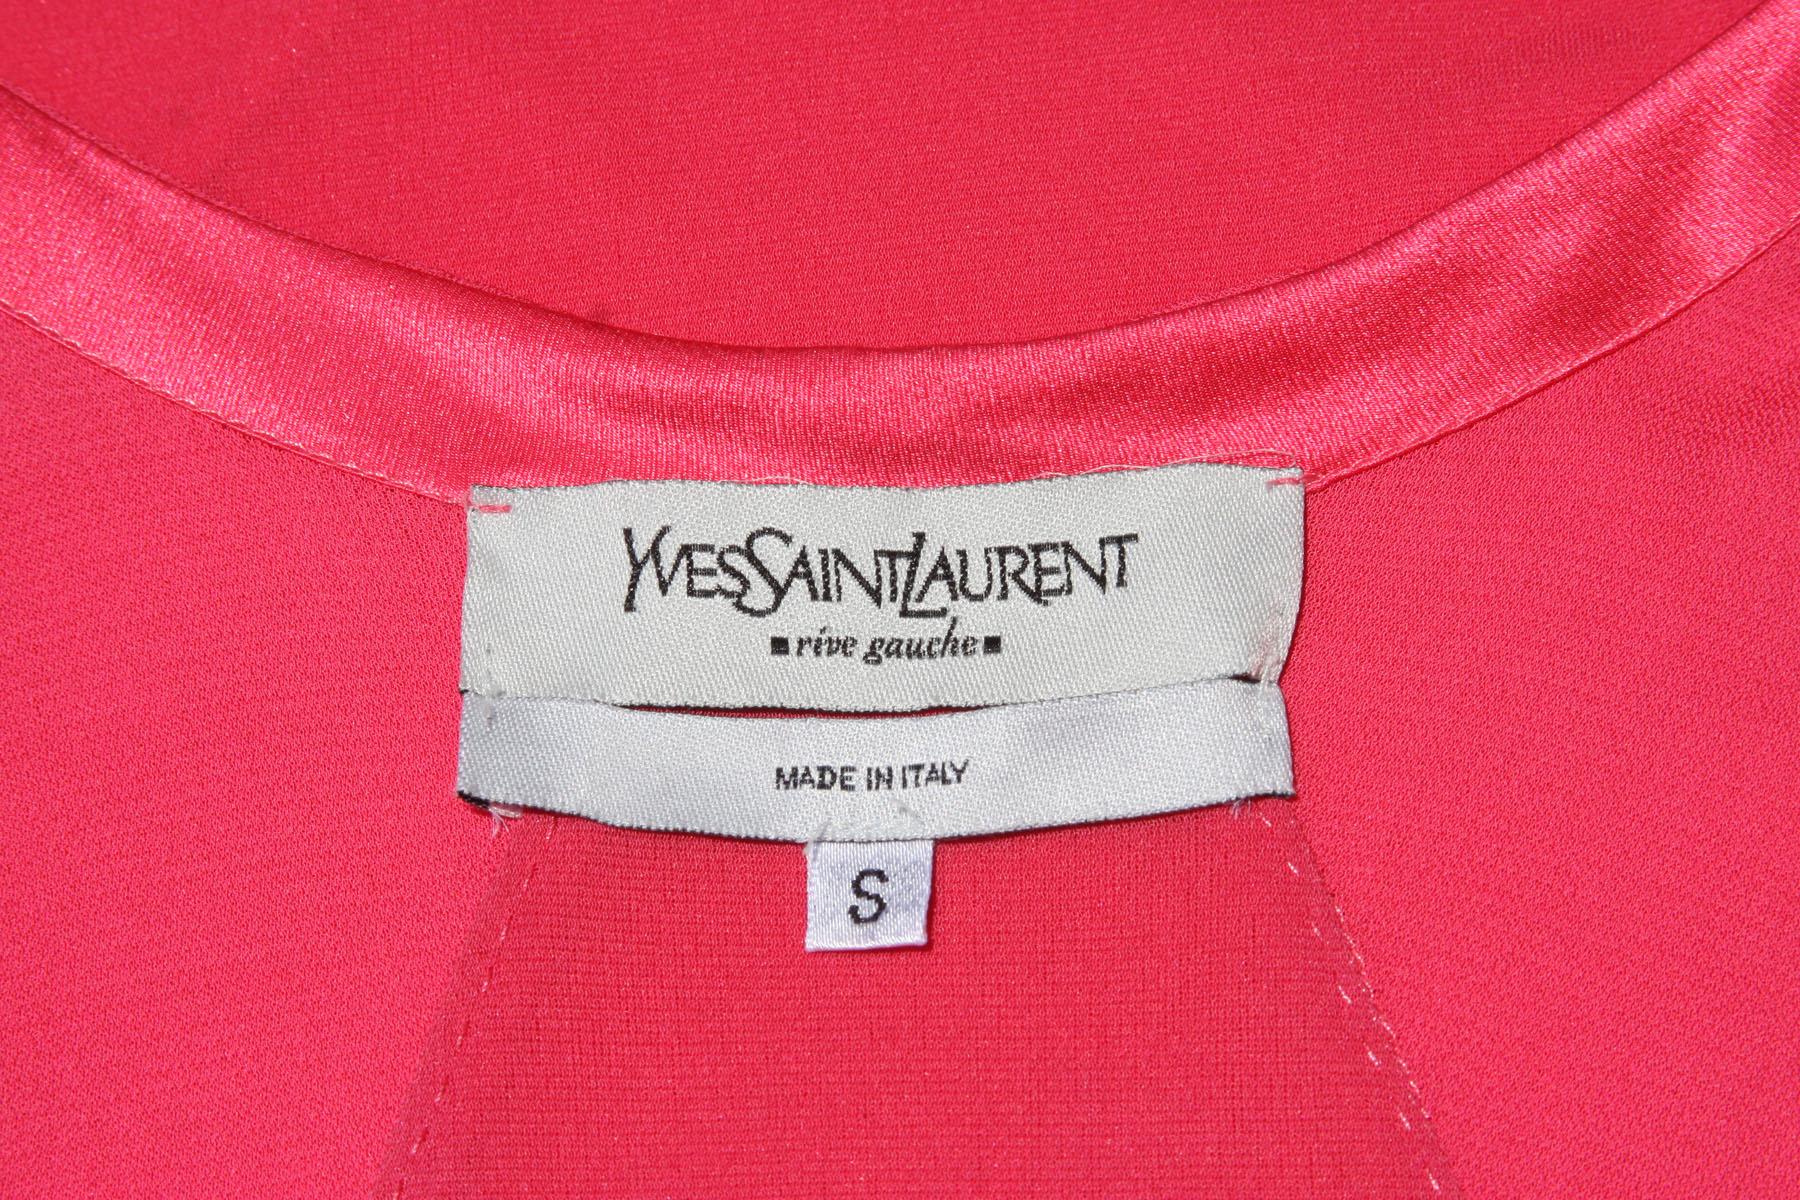 Tom Ford for Yves Saint Laurent F/W 2004 Collection Pink Jersey Dress size S For Sale 1